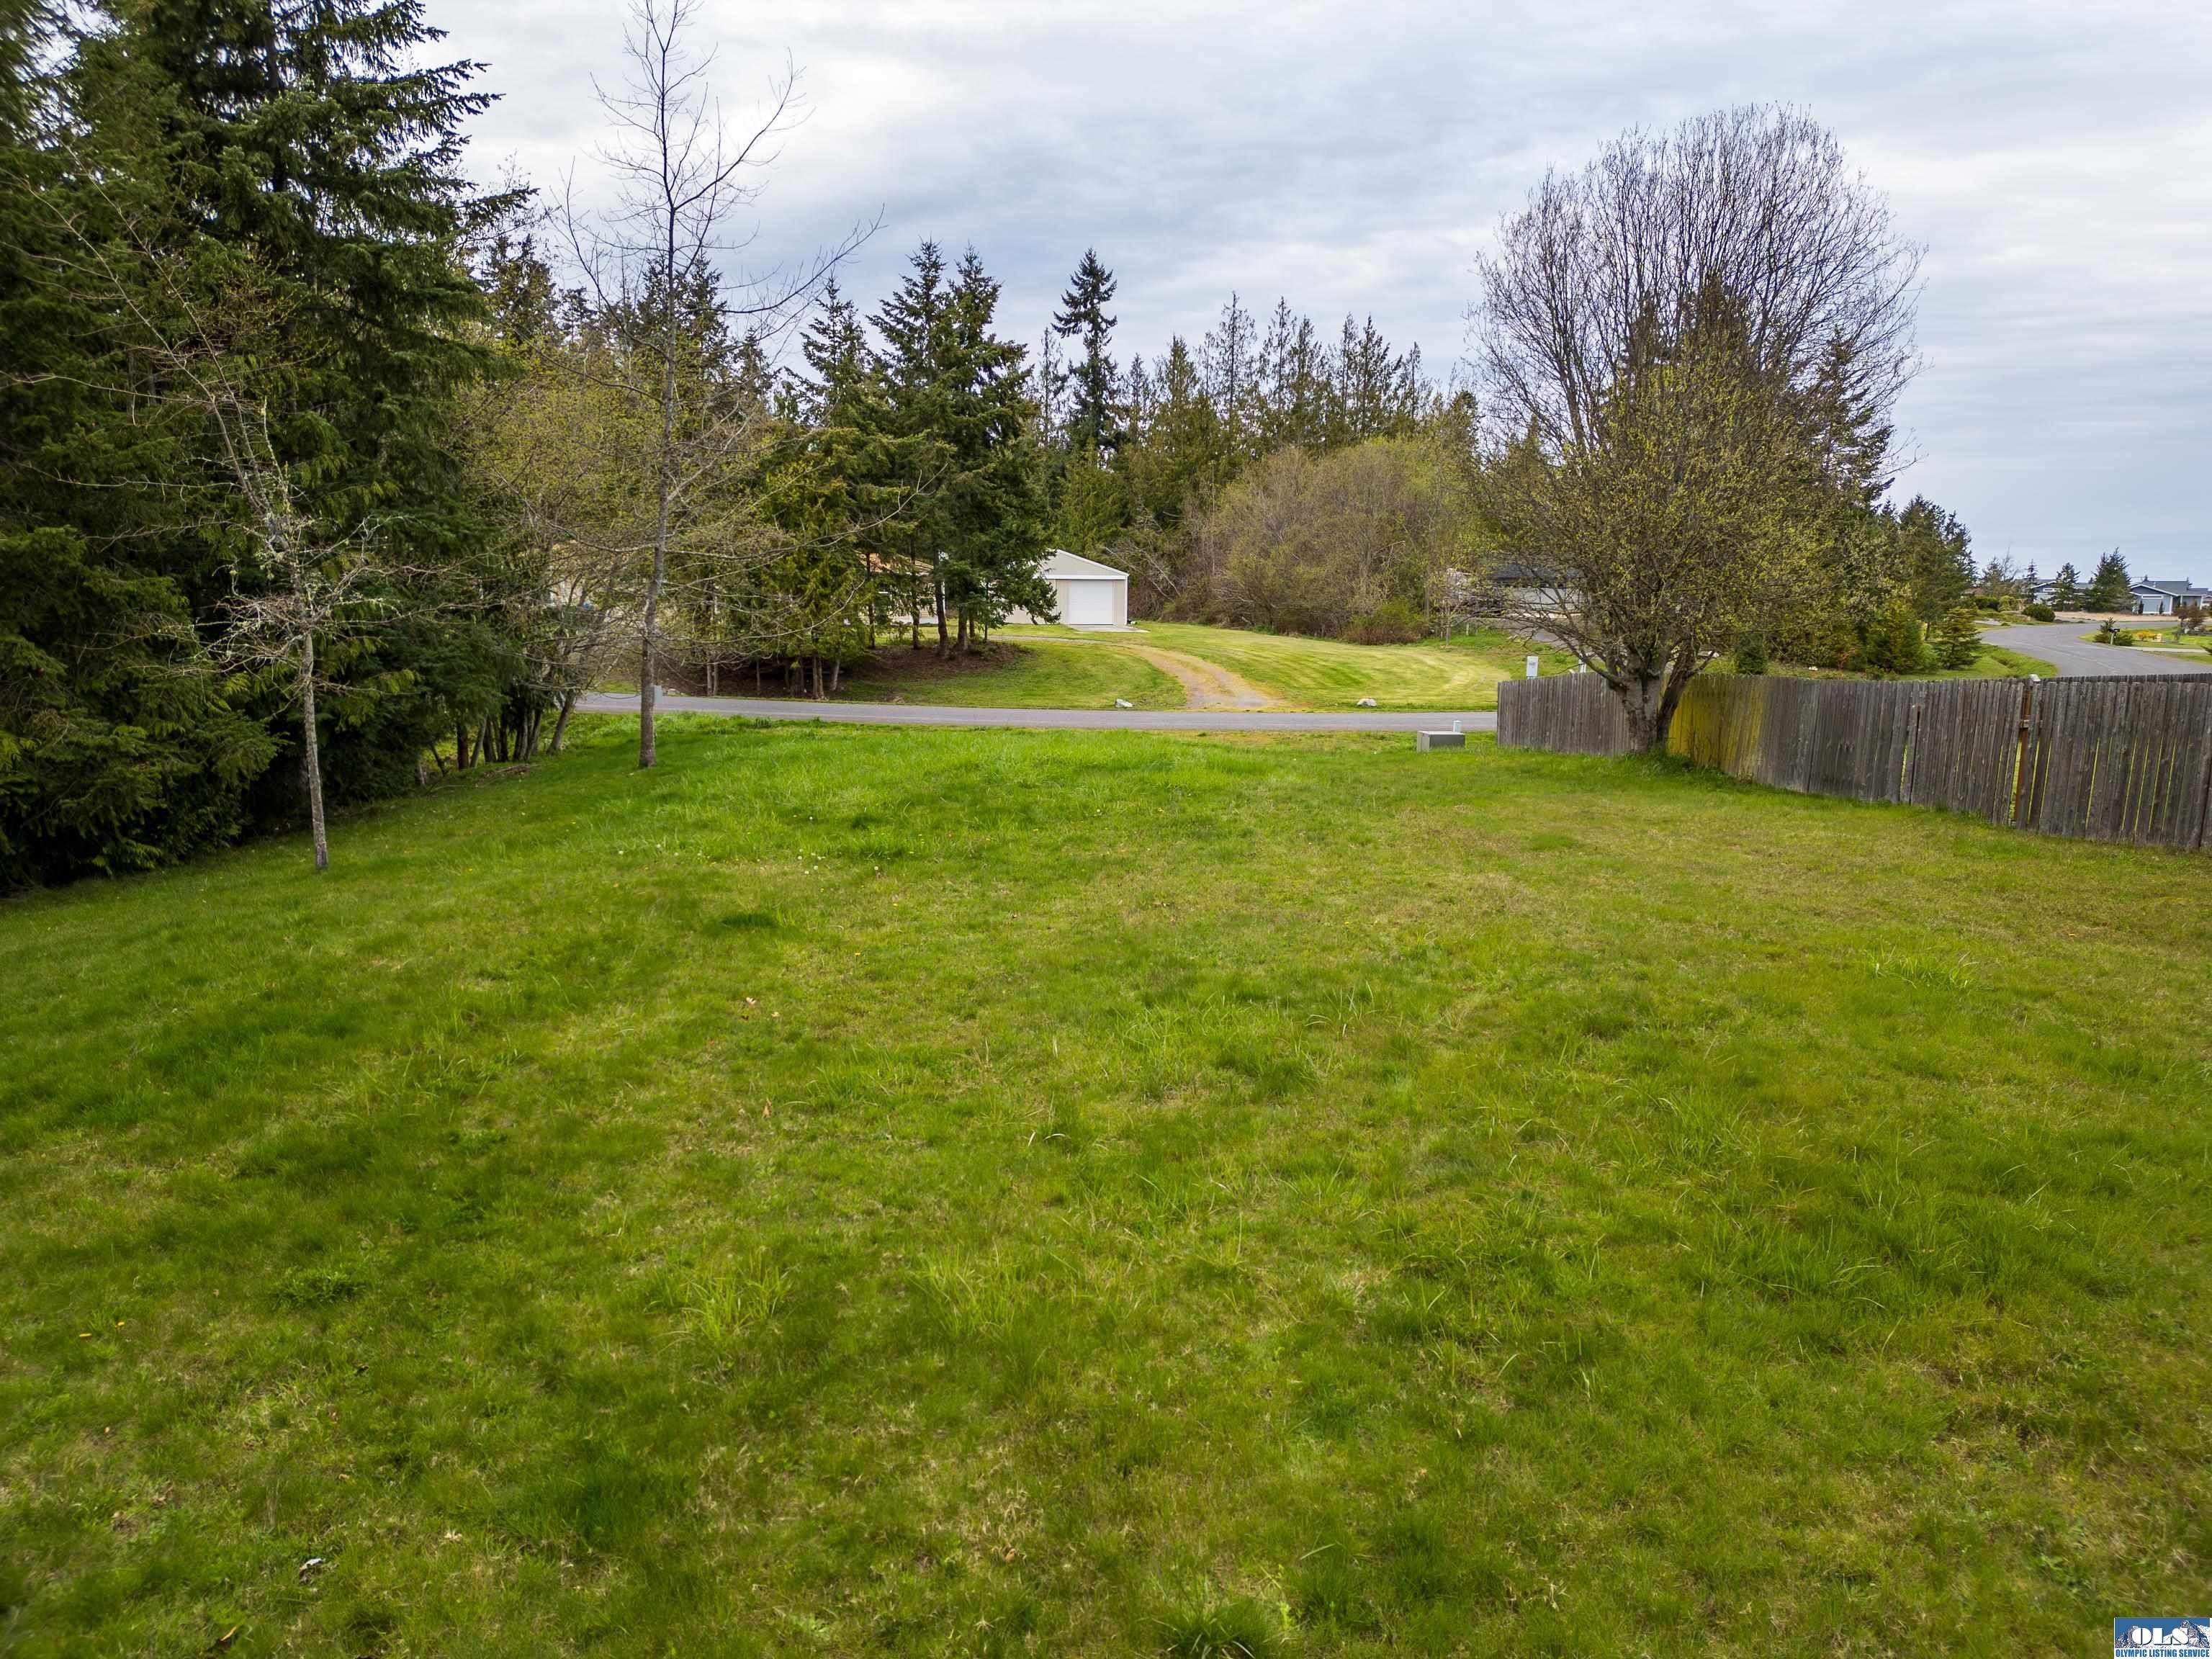 7. Rhododendron Drive Lot 5